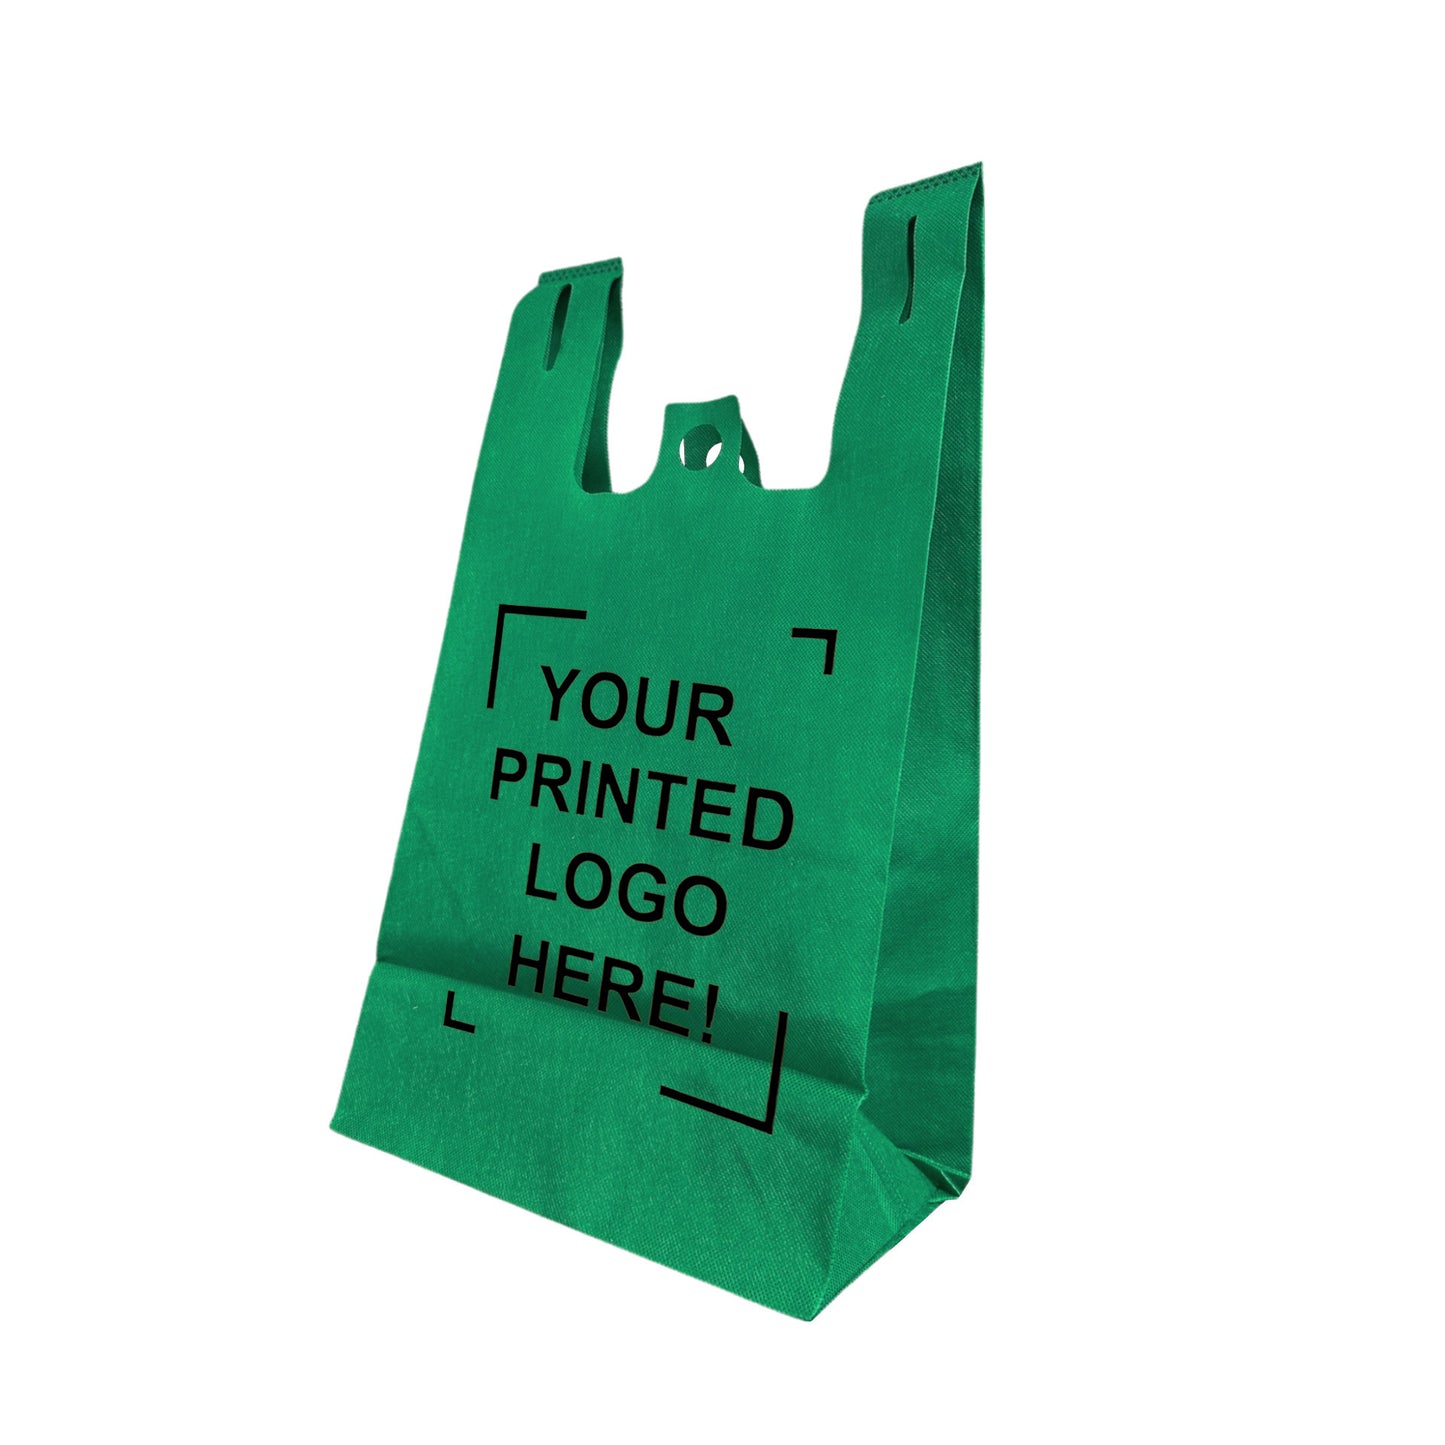 200pcs, Non-Woven Reusable T-Shirt Bag 11x7x20x7 inches Dark Green Shopping Bags Square Bottom, One Color Custom Print, Printed in Canada